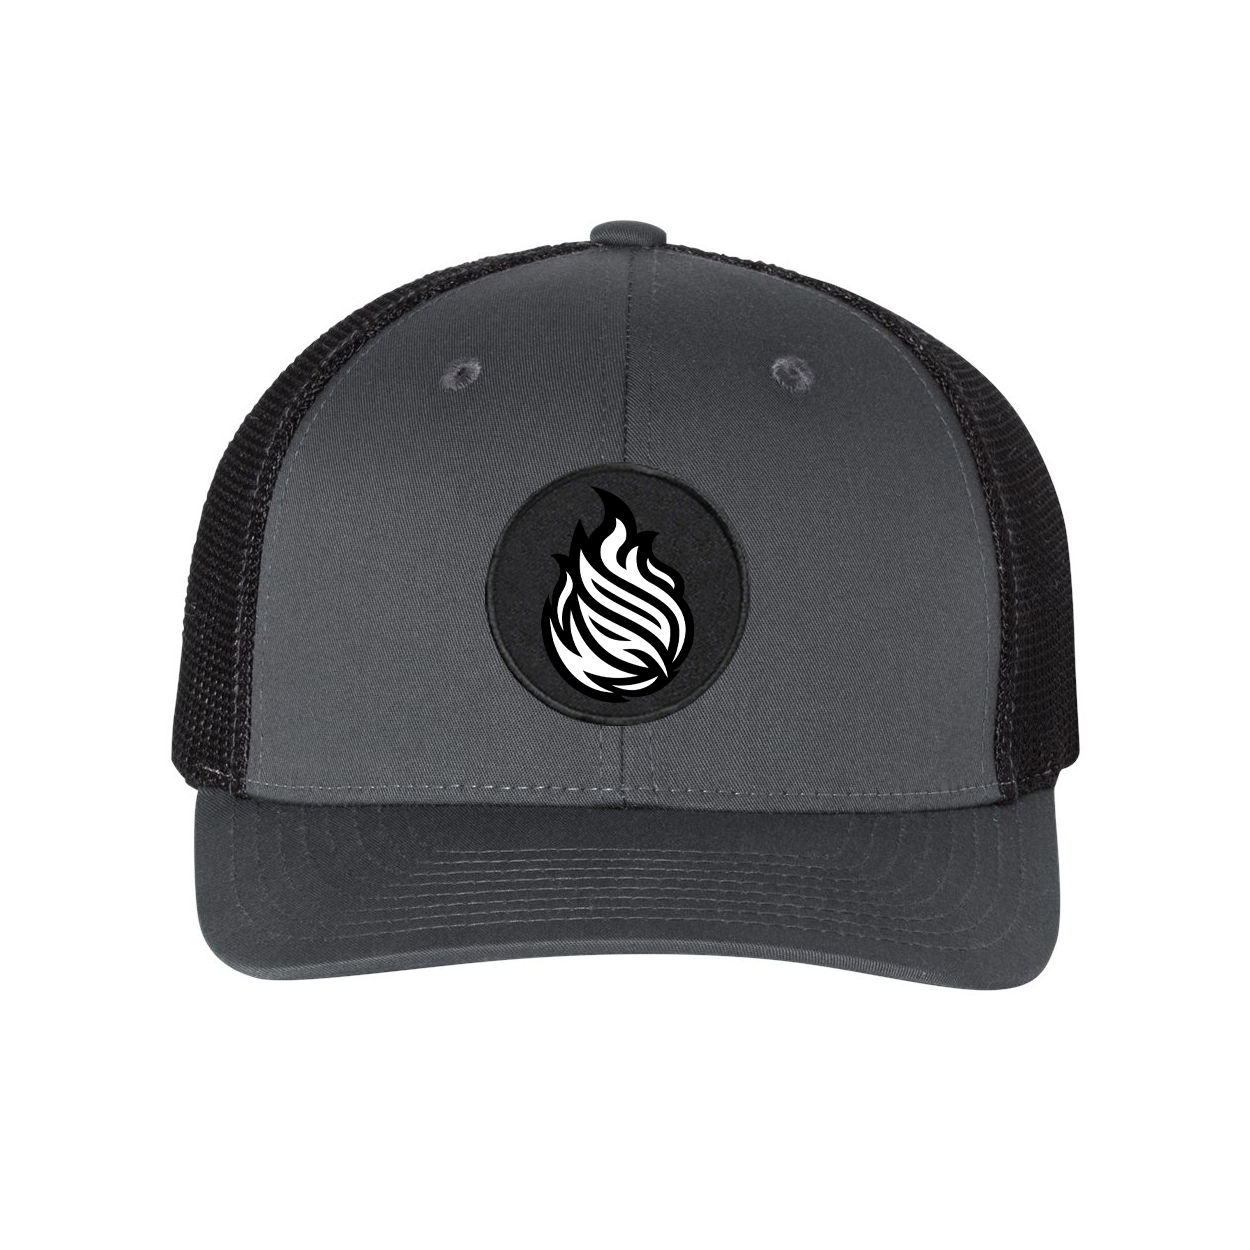 Near An Open Flame Classic Woven Circle Patch Snapback Trucker Hat Gray/Black (White Logo)